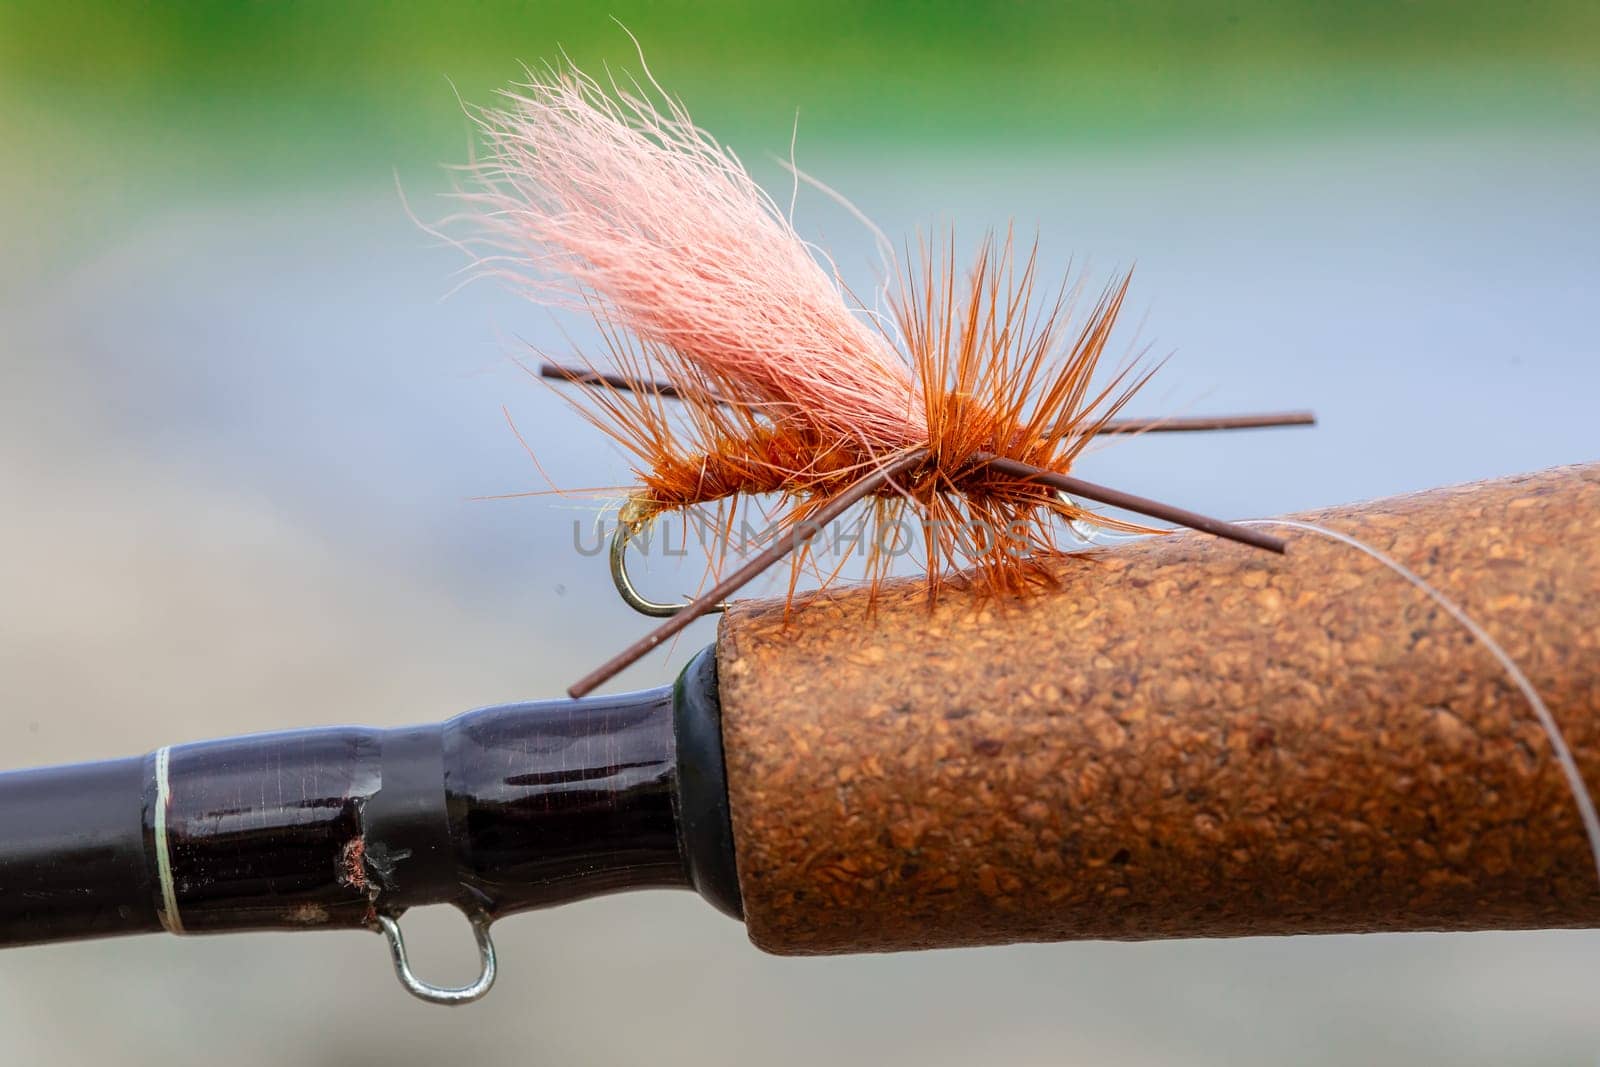 Dry fly pattern in orange with rubber legs on the cork grip of a fly fishing rod at the river.